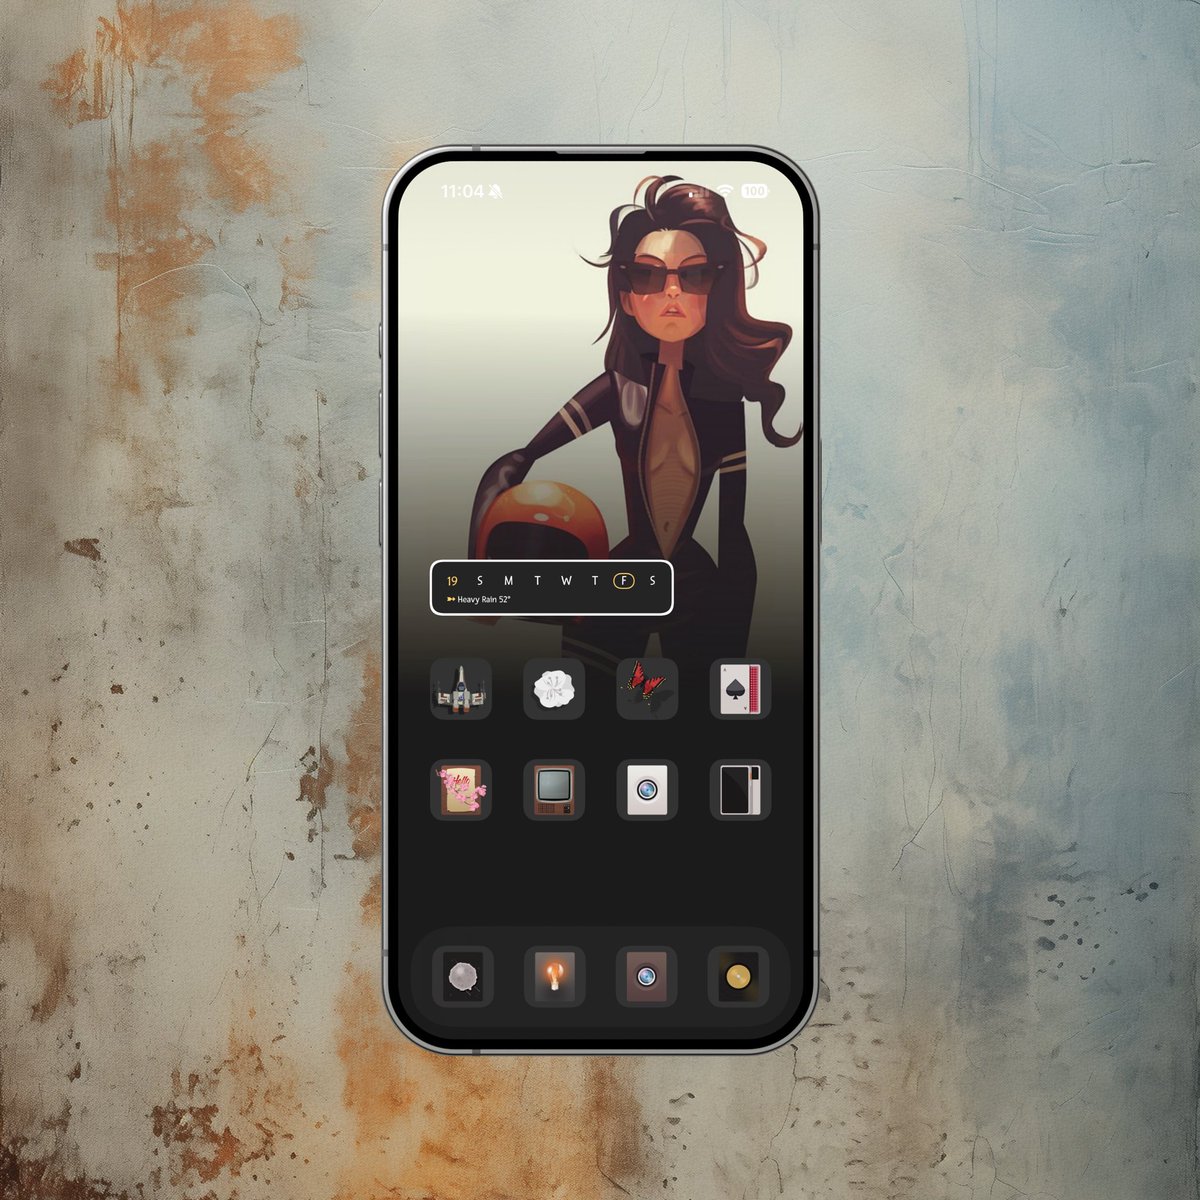 Stock iOS Wall @Maria2Ps Widgy @Zooropalg Icons @paulebh0y Template @SeanKly